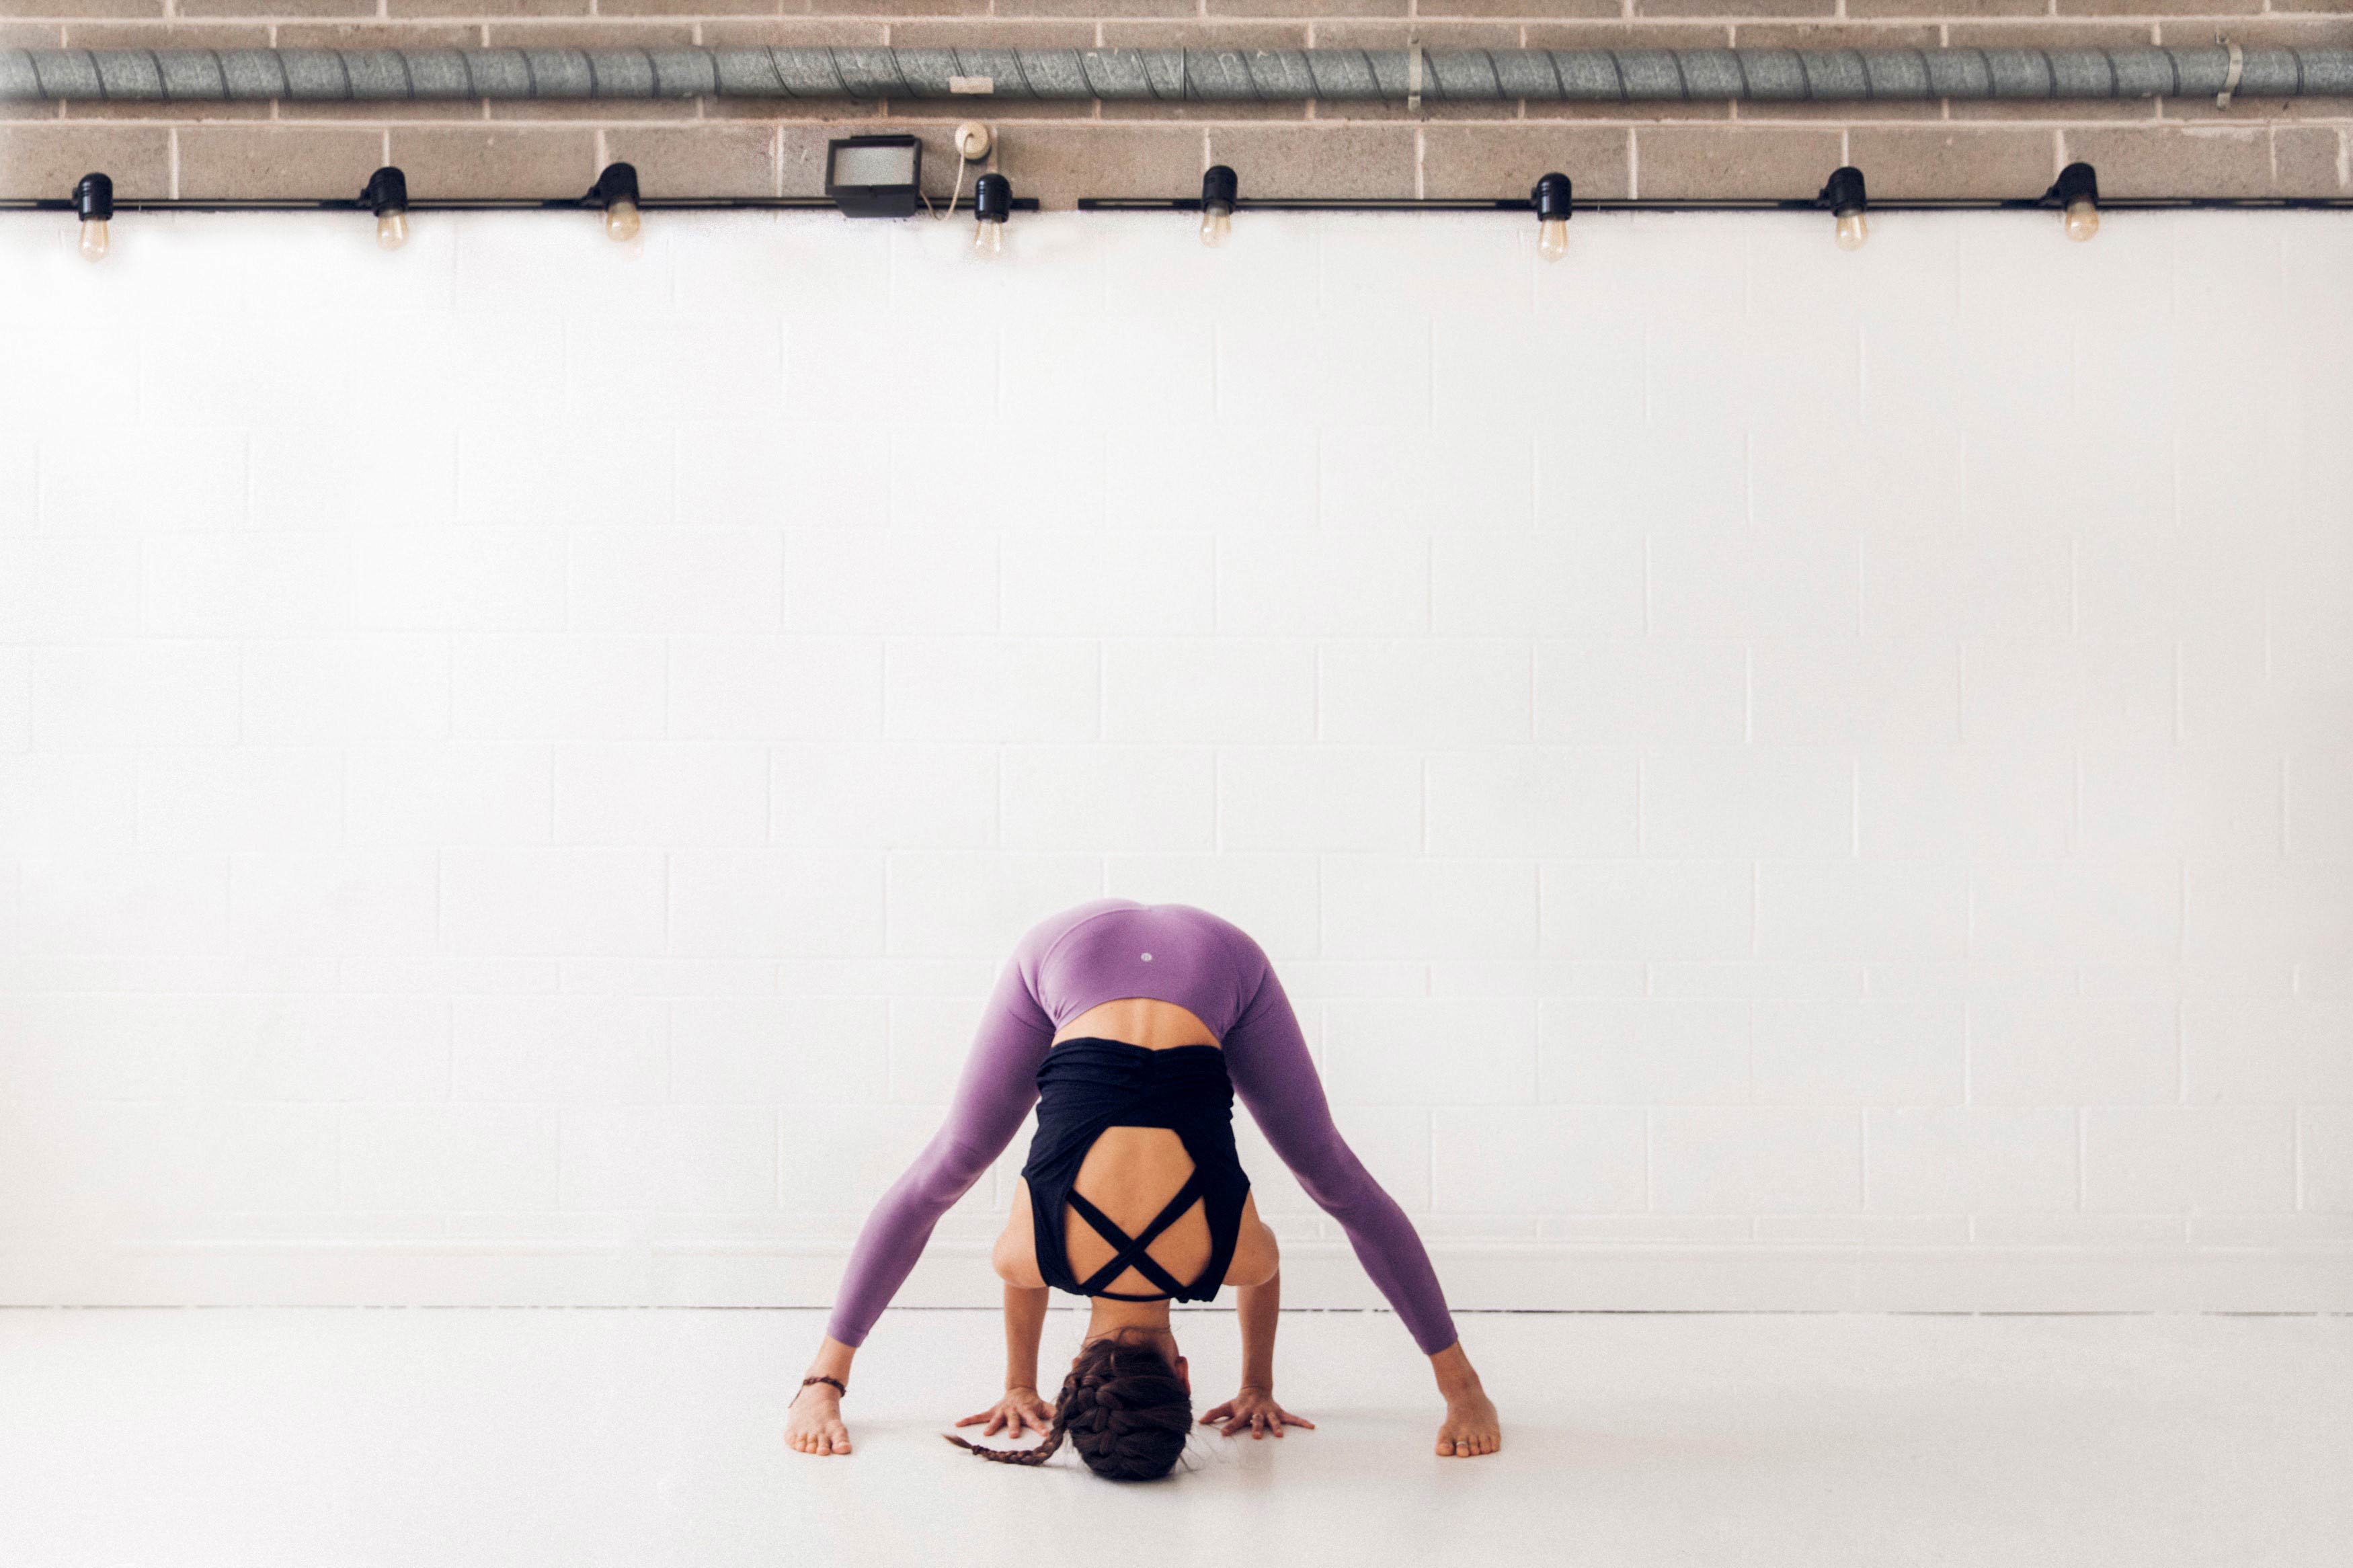 Yoga for Recovery - These 10 Poses Can Help You Recover from Addiction